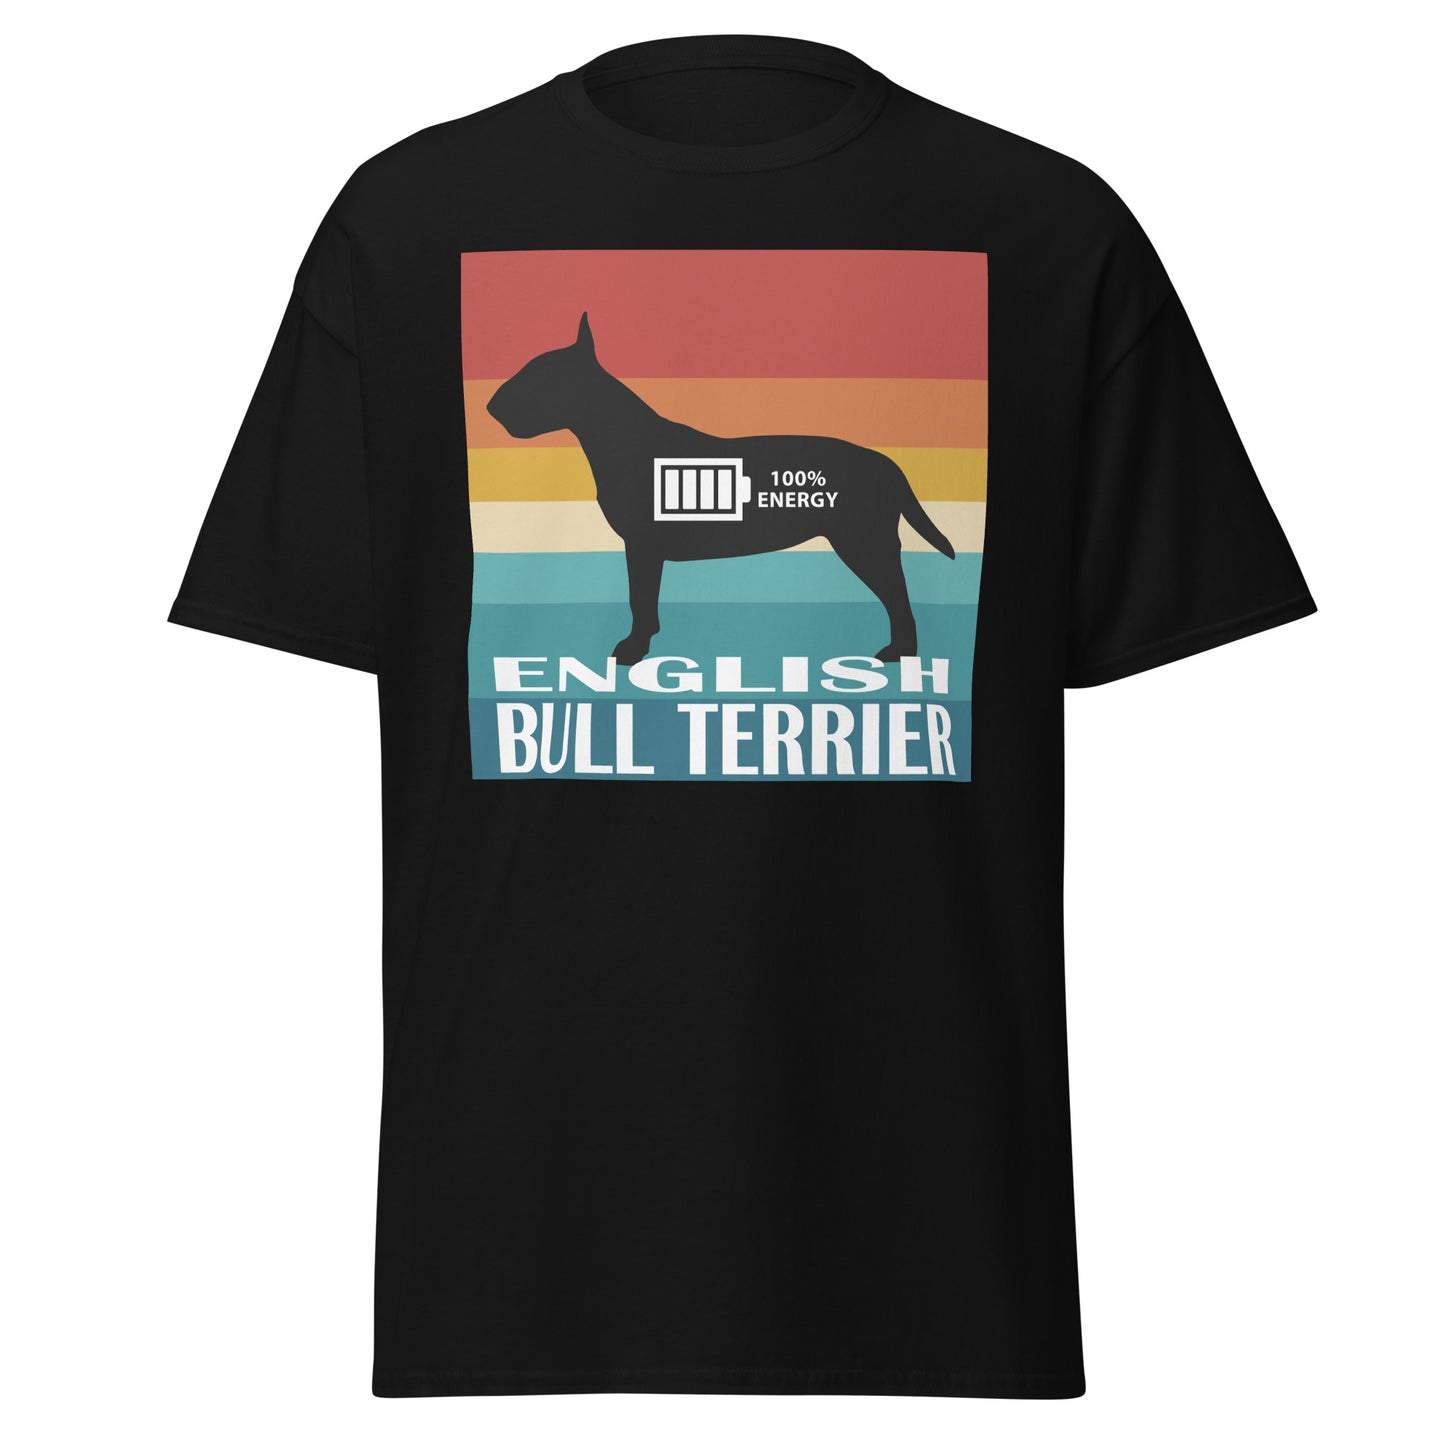 English Bull Terrier 100% Energy Men's classic tee by Dog Artistry